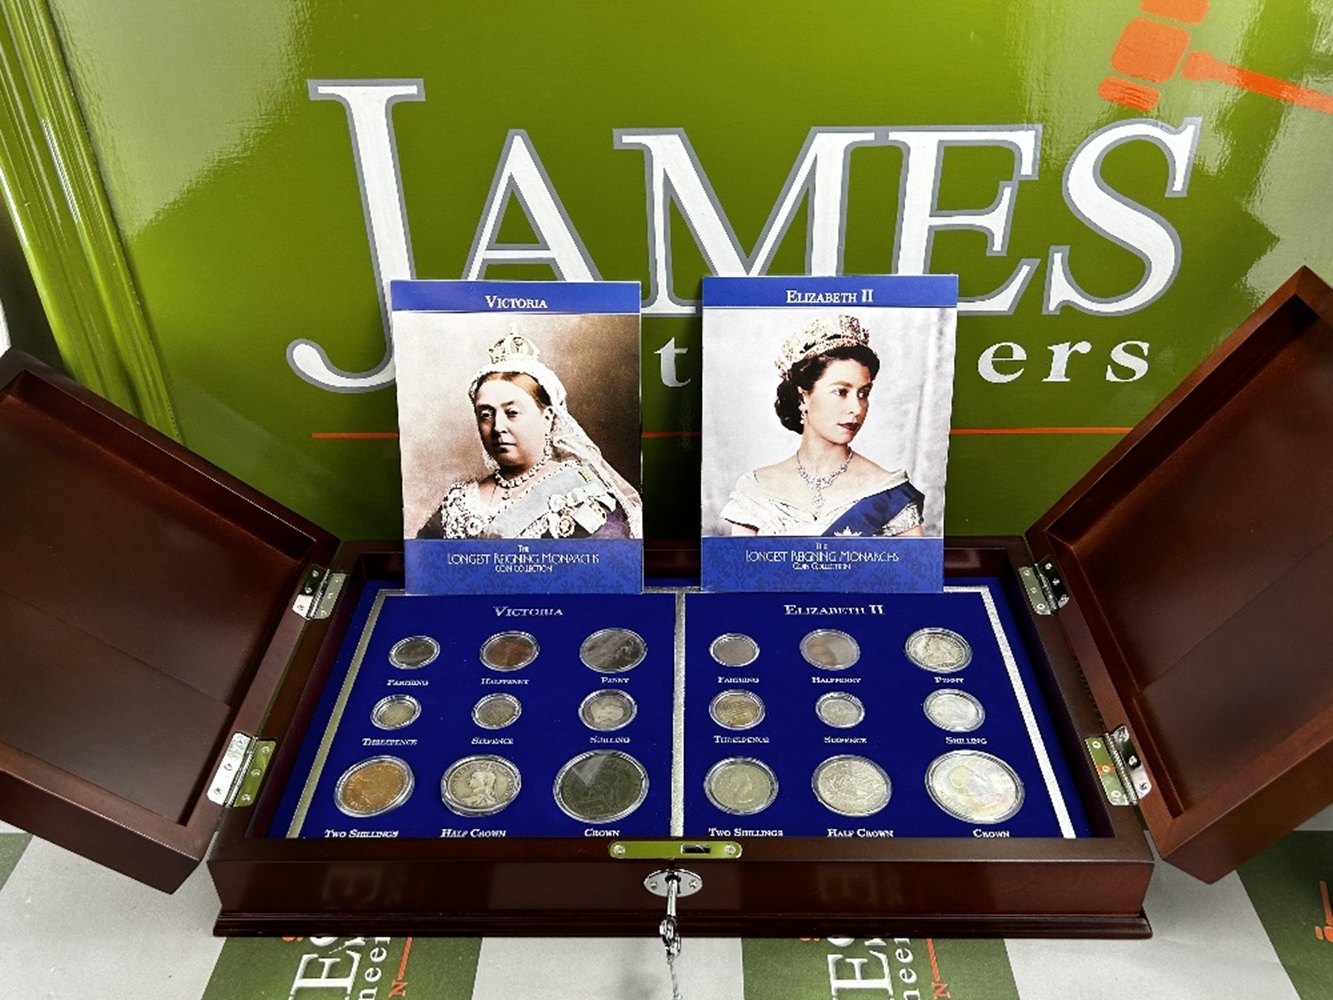 Danbury Mint Victoria and Elizabeth II Authentic Coin collection. - Image 2 of 9